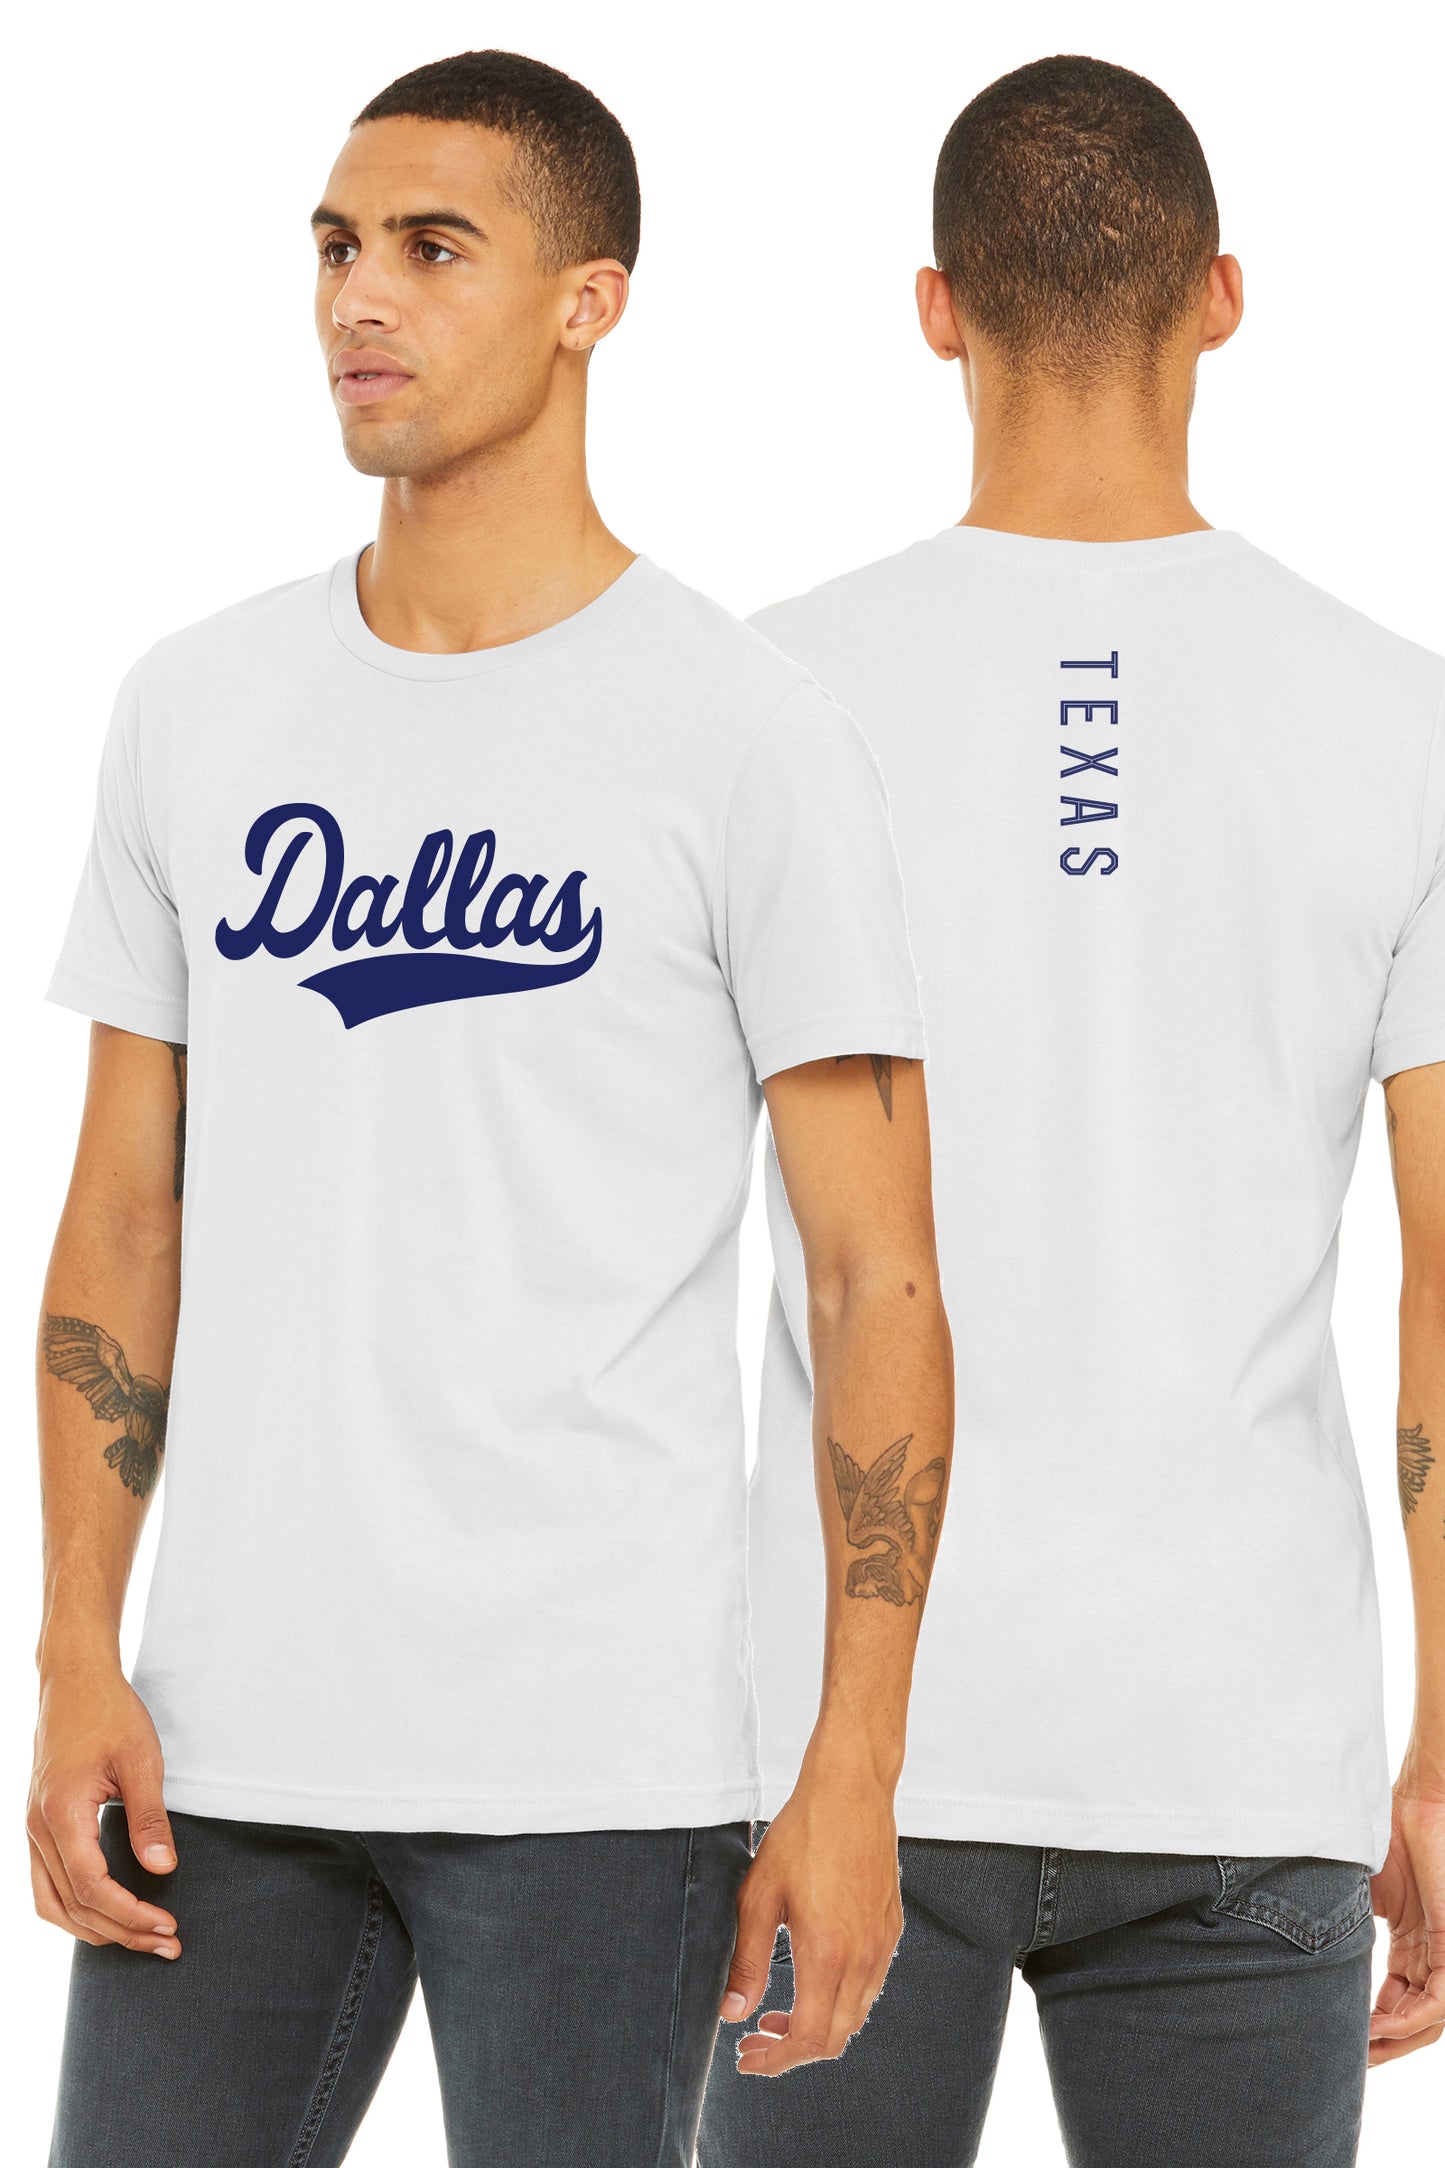 Daxton Adult Unisex Tshirt Dallas Script with Texas Vertical on the Back